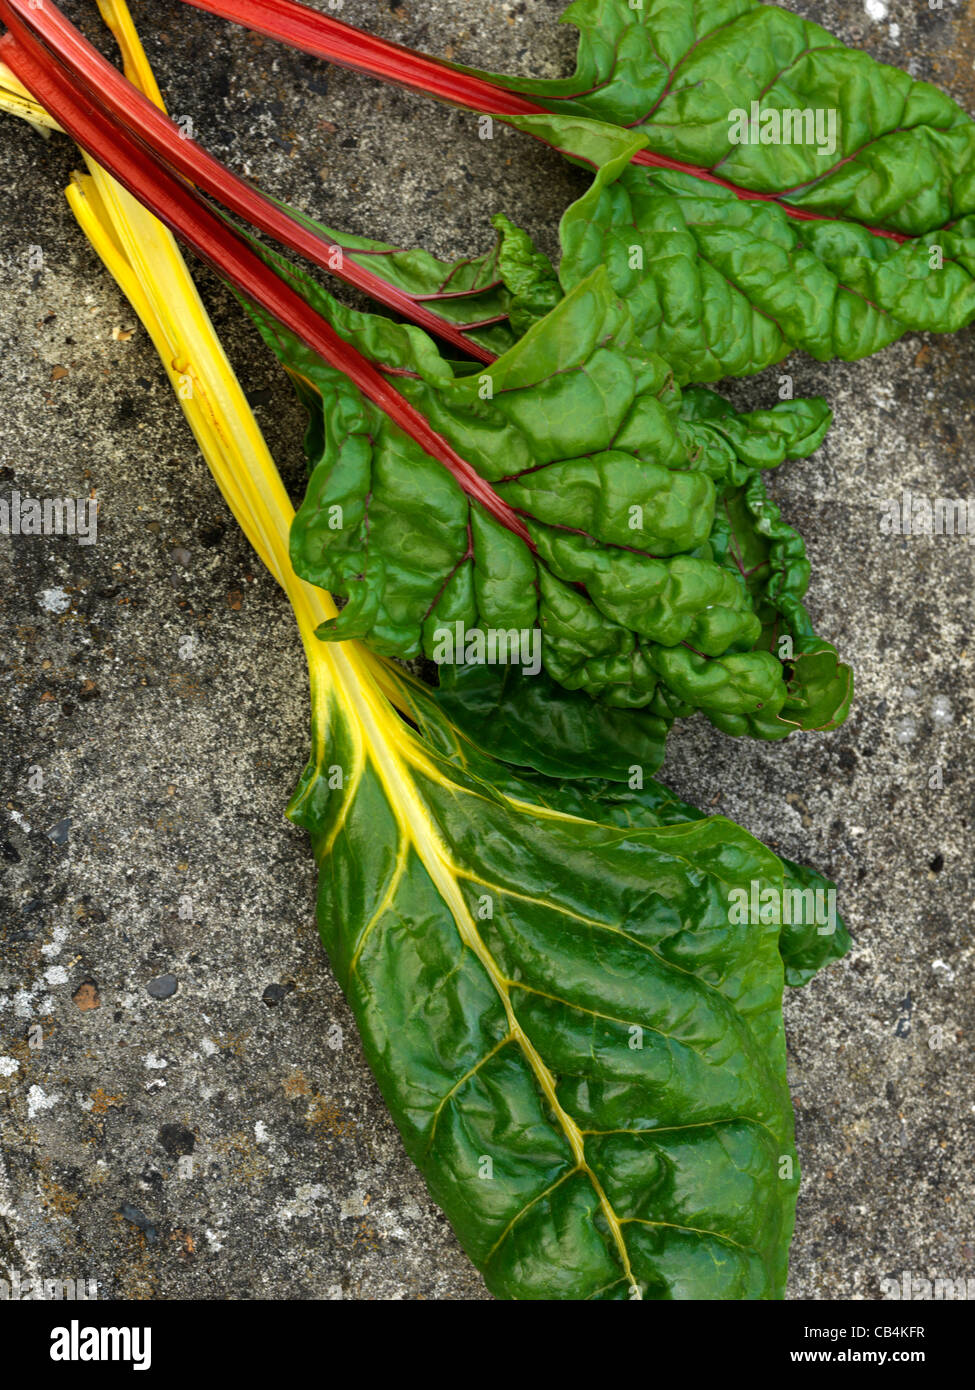 Swiss Chard Spinach Type Vegetable with Red and Yellow Stalks Beta Cicla From The Beet Family Stock Photo